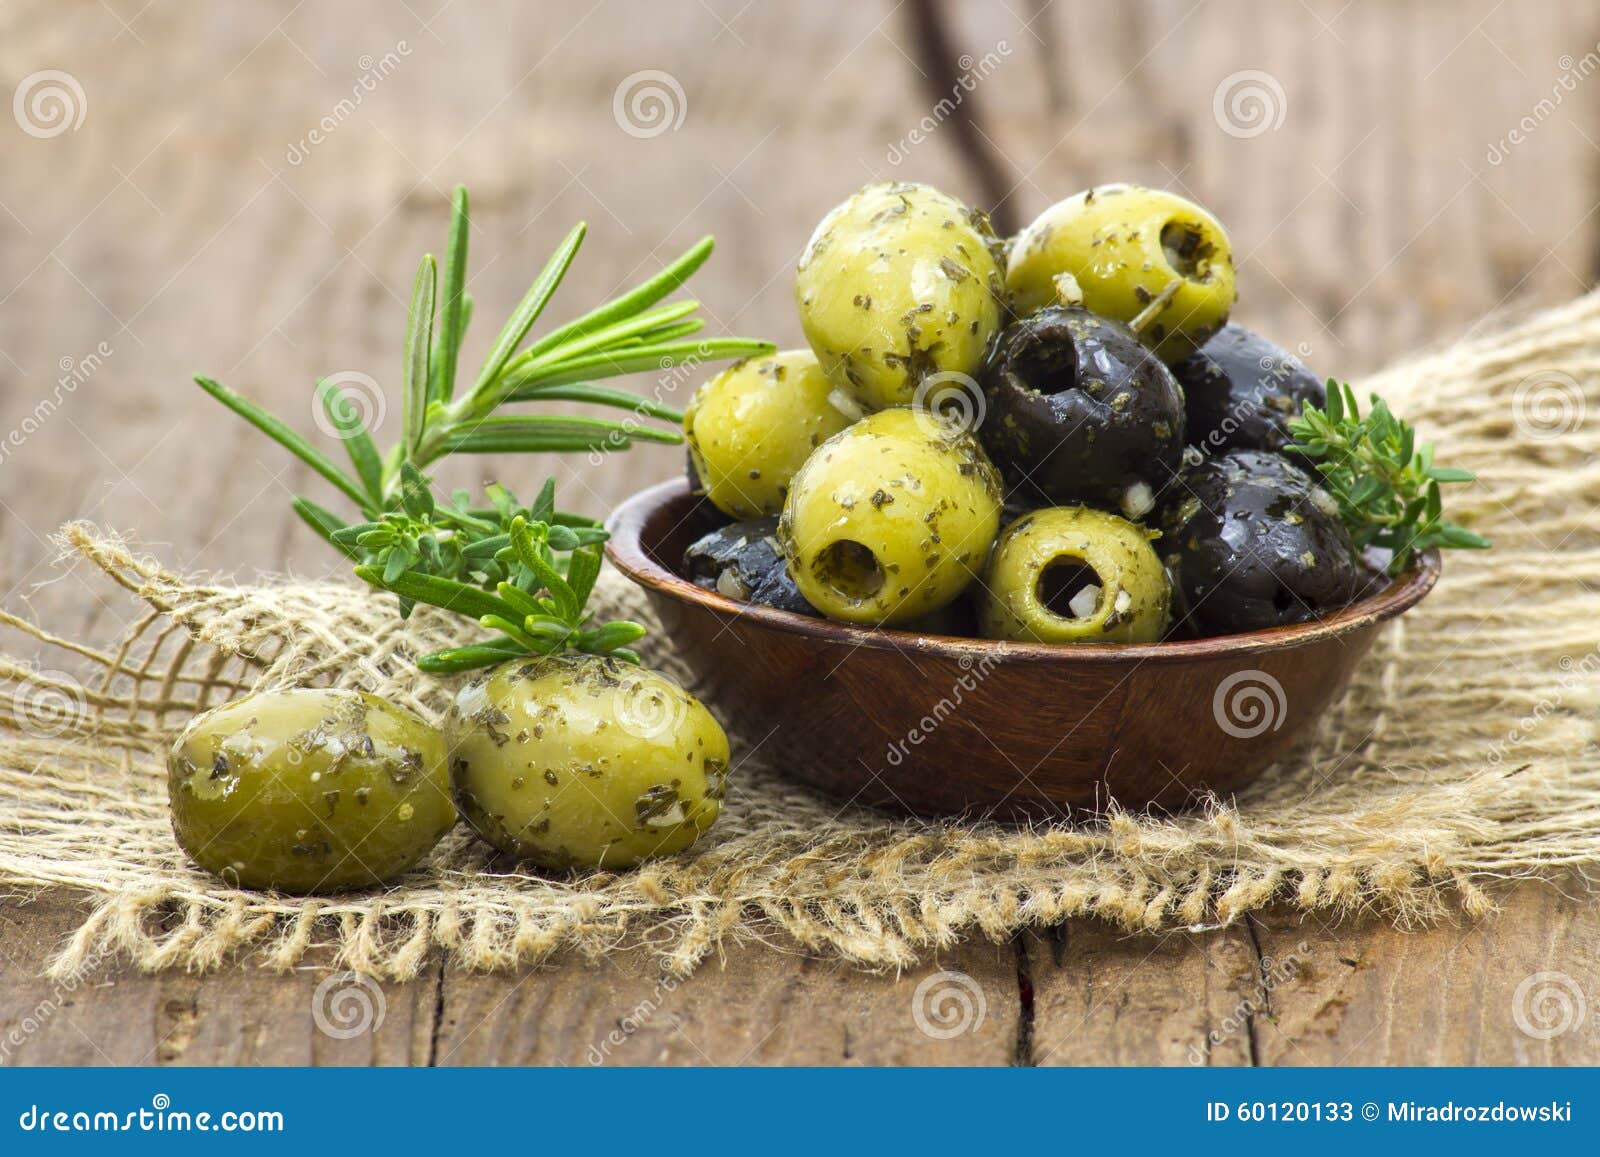 black and green olives marinated with garlic and fresh mediterra